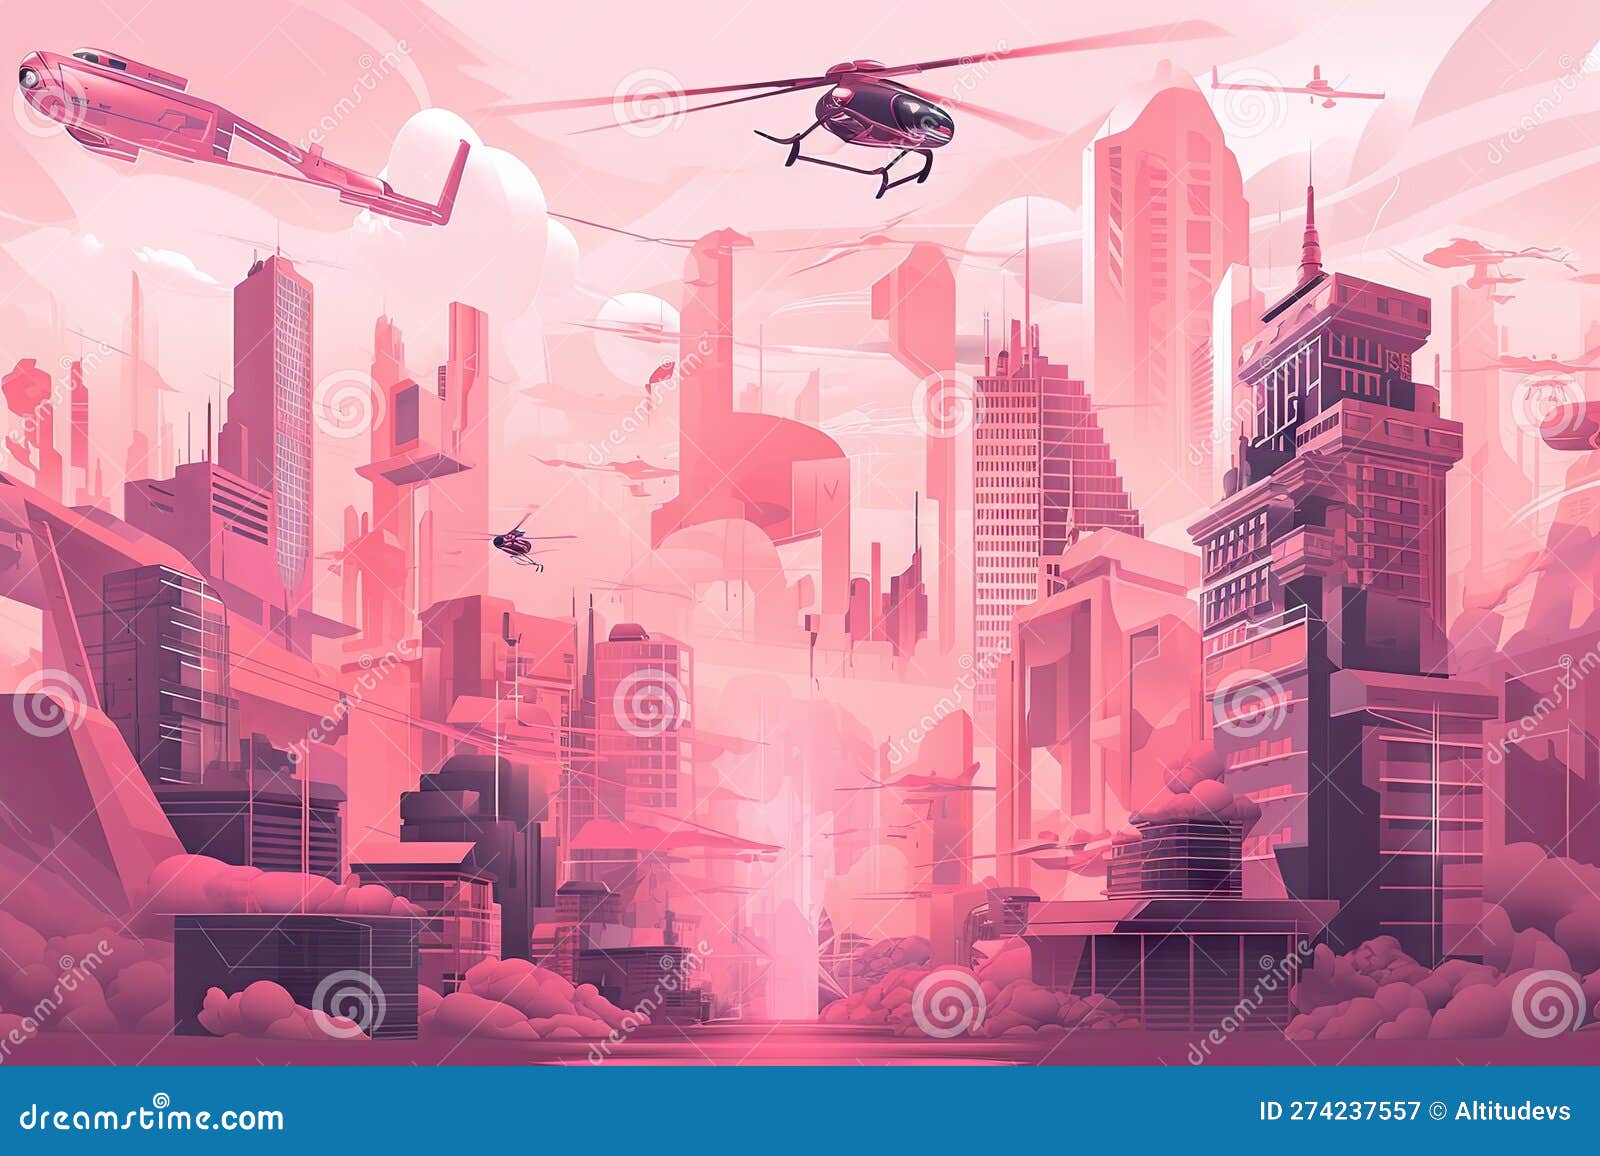 Pink Futuristic Cityscape with Towering Skyscrapers and Flying ...